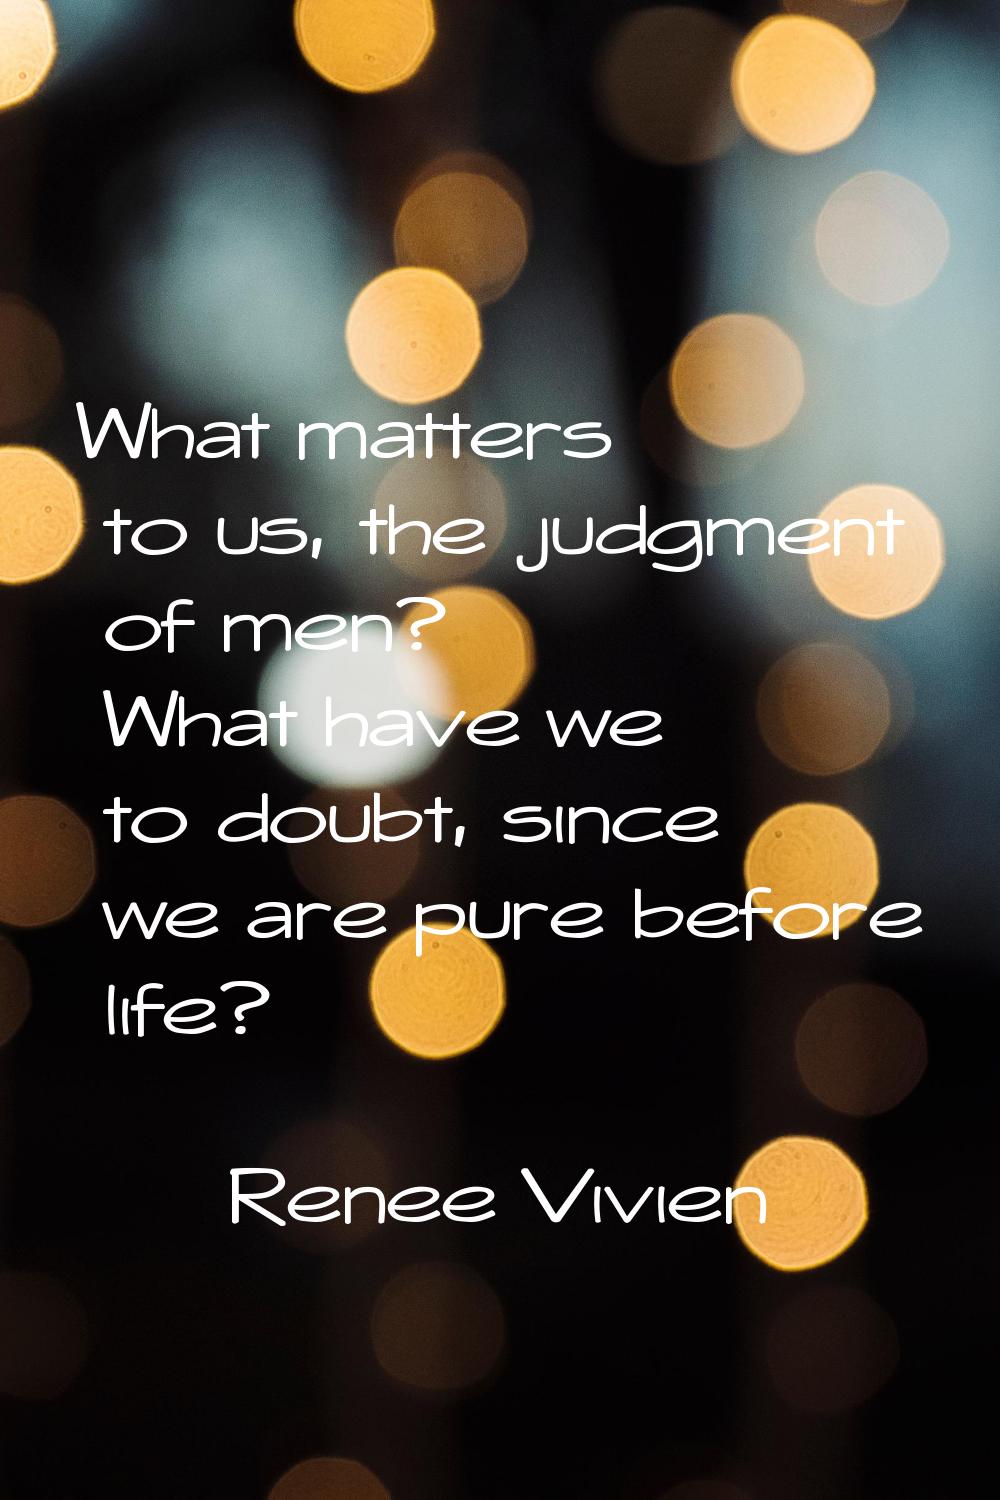 What matters to us, the judgment of men? What have we to doubt, since we are pure before life?